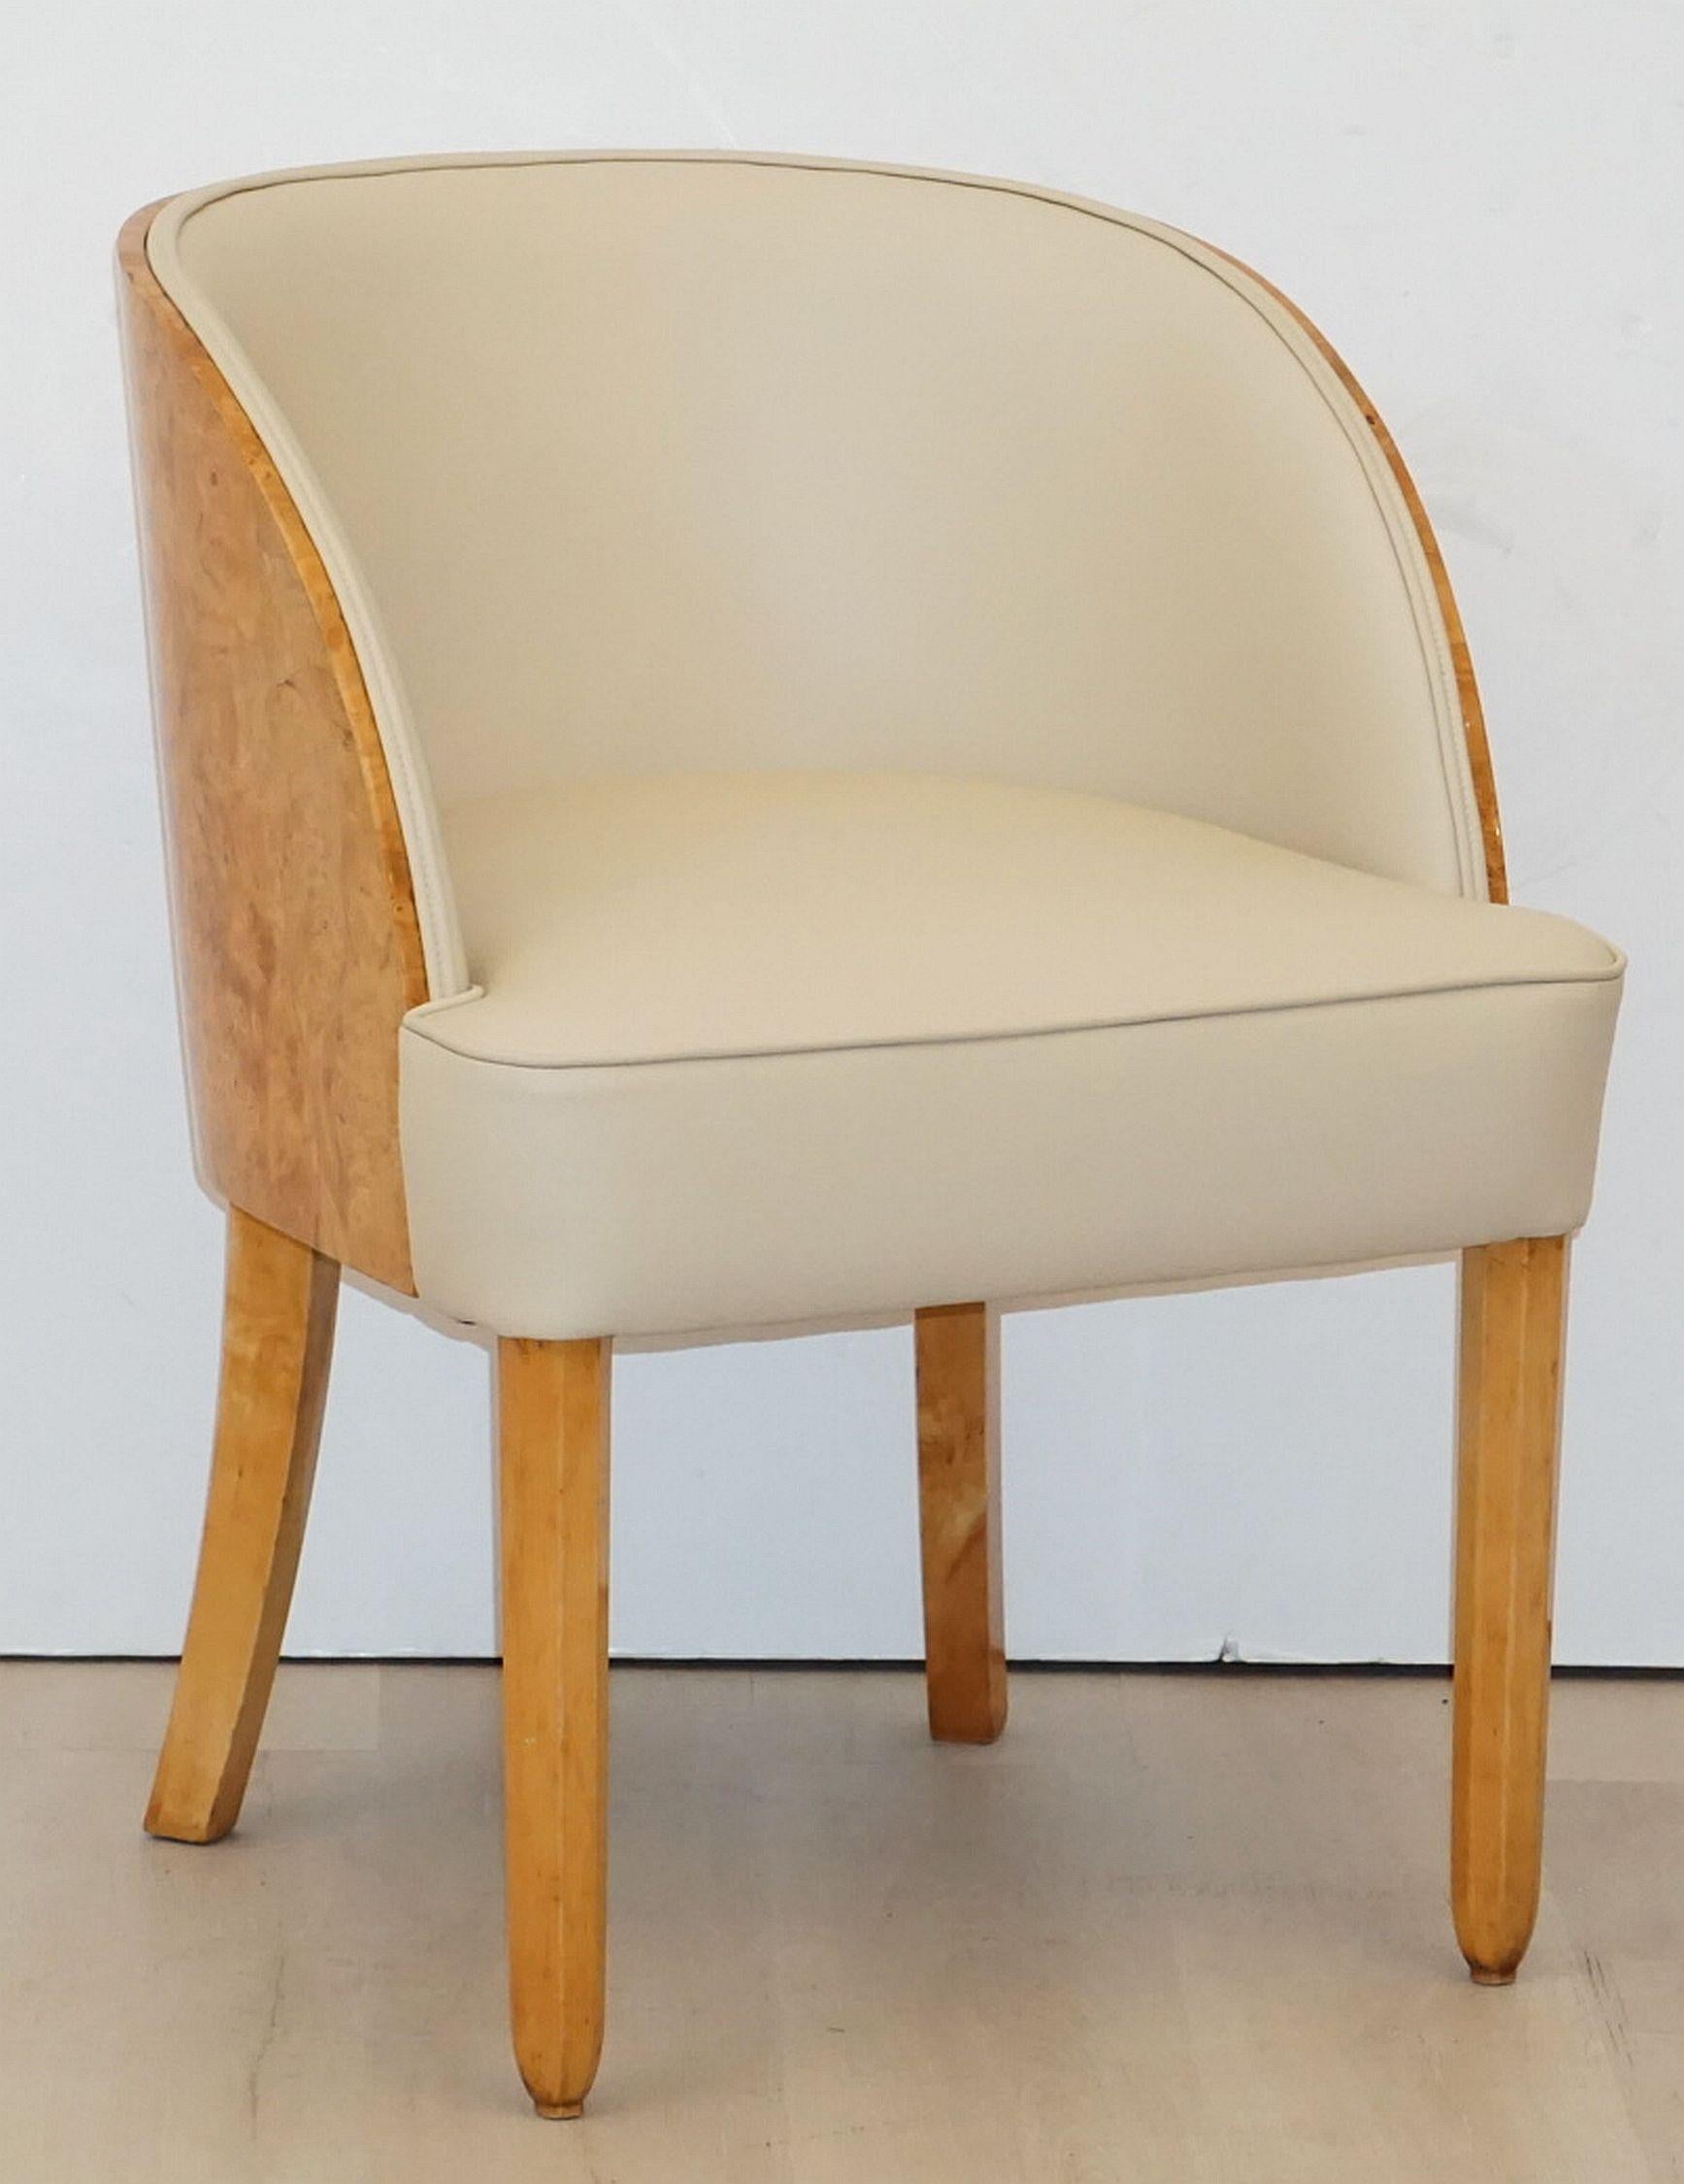 A comfortable English tub chair from the Art Deco period, featuring a bleached walnut veneer, re-upholstered back and seat in cream leather, on tapering chamfered legs. Attributed to Harry & Lou Epstein.

Cabinet makers: H.& L. Epstein, London.